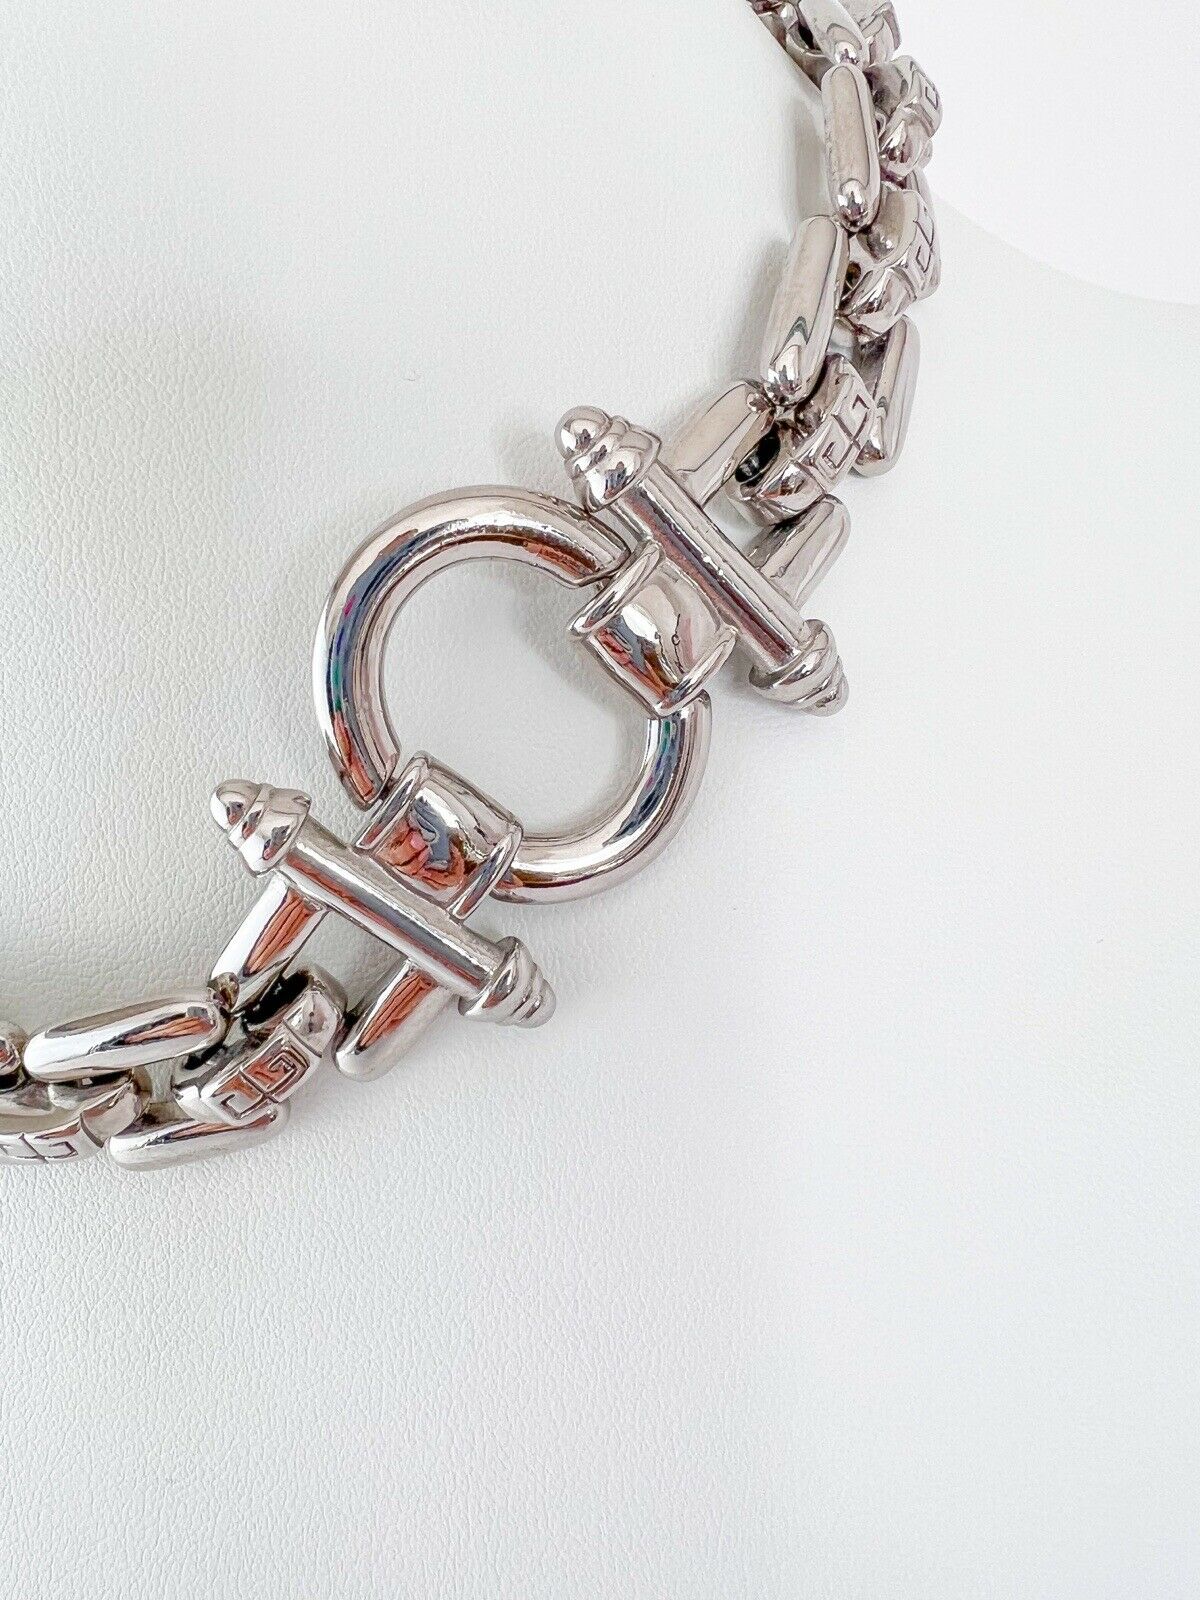 【SOLD OUT】Givenchy Vintage Silver Tone Chain Choker Necklace Iconic Logo